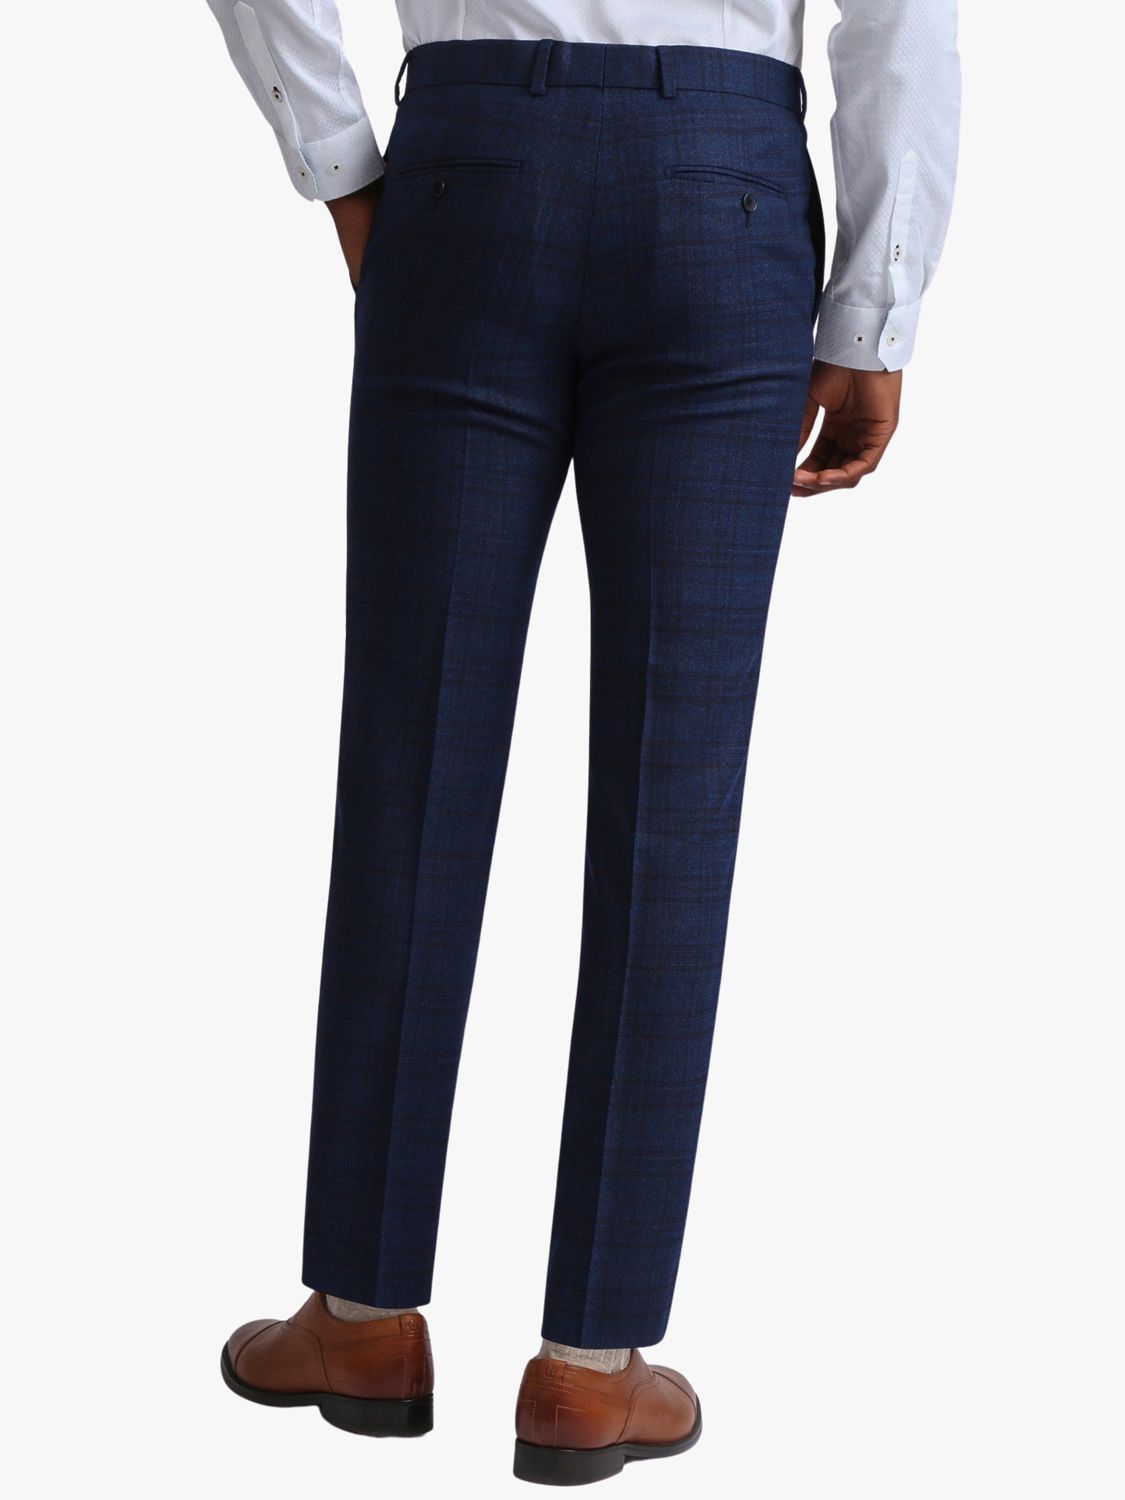 Buy Ted Baker Munro Slim Fit Check Suit Trousers, Navy Online at johnlewis.com